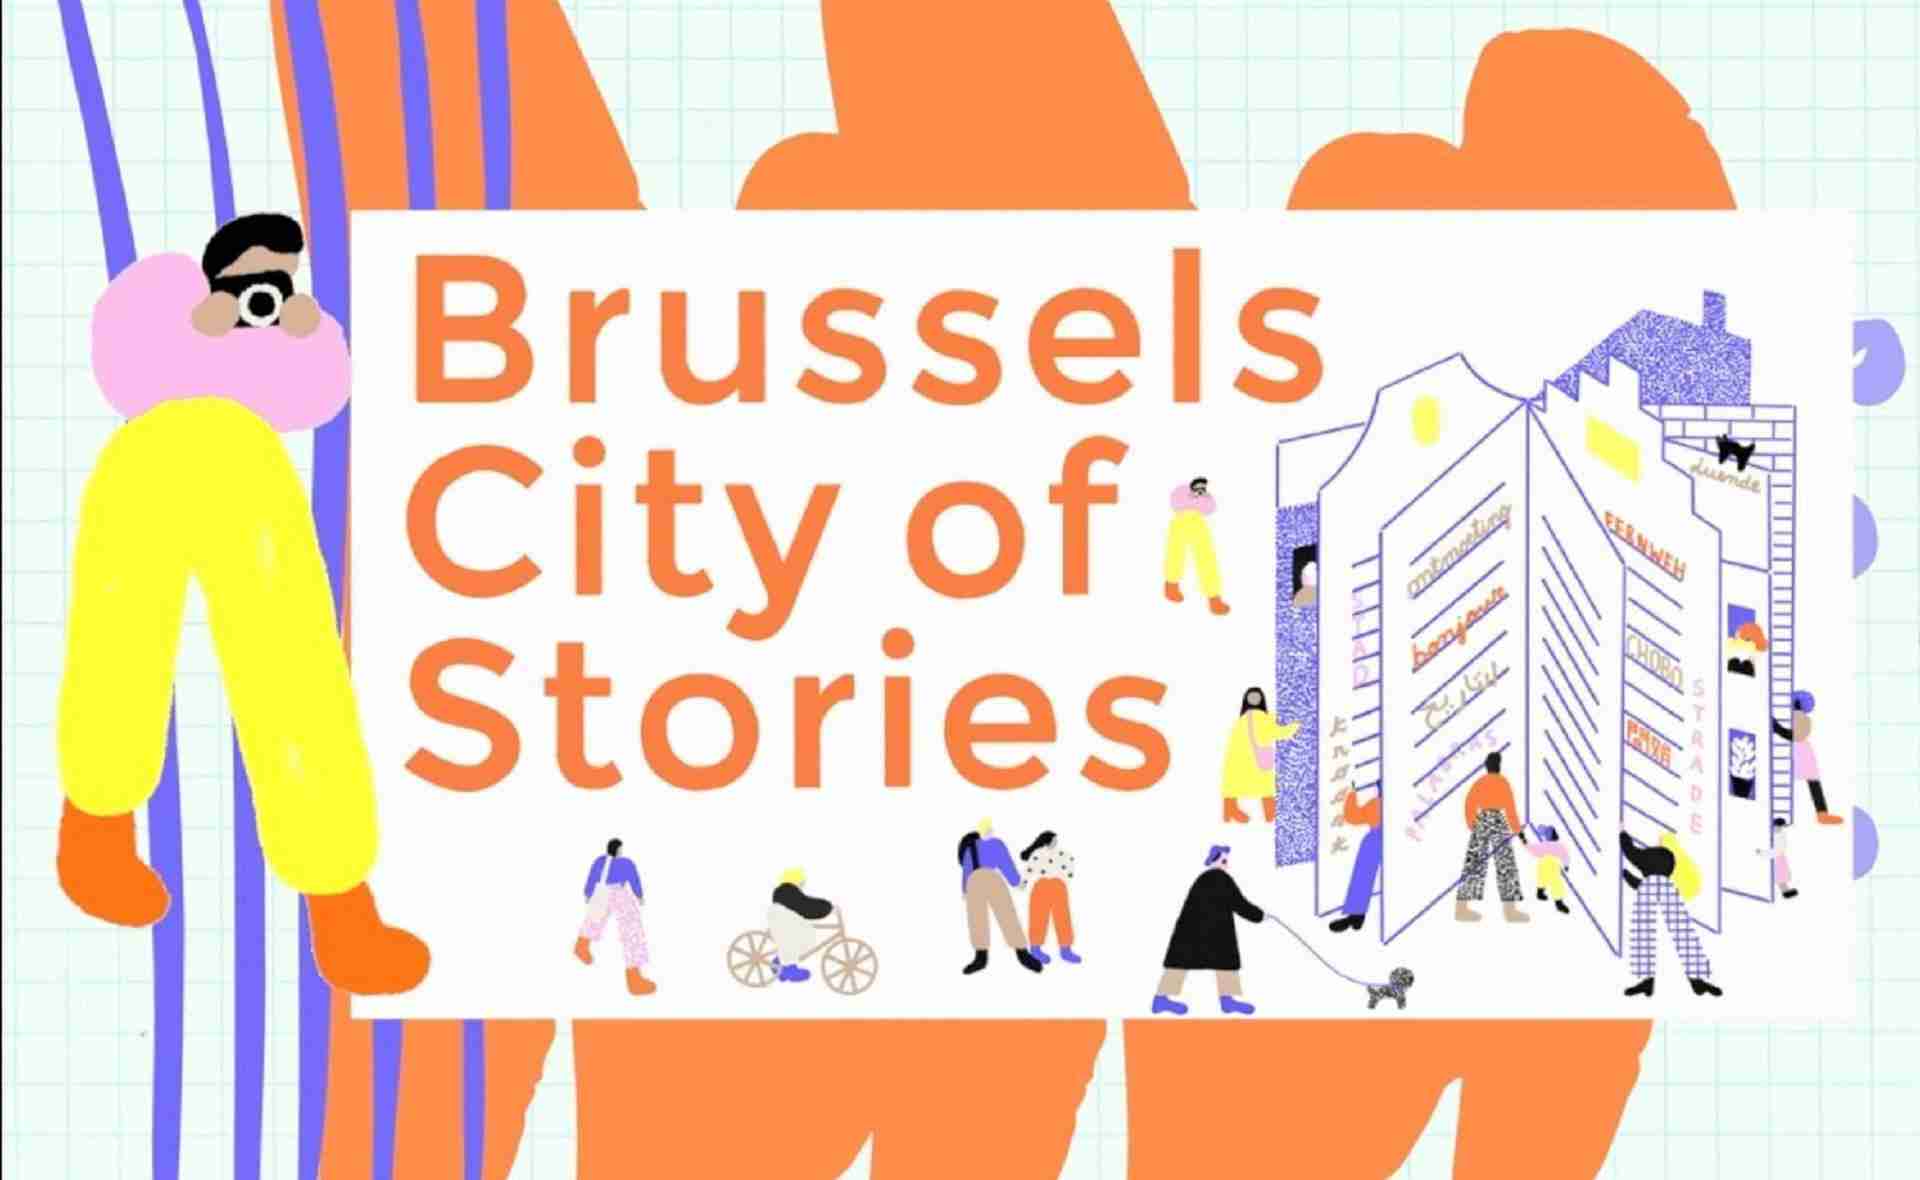 Brussels City of stories - a STORY FESTIVAL of encounters of Brussels citizens in and around public transport
